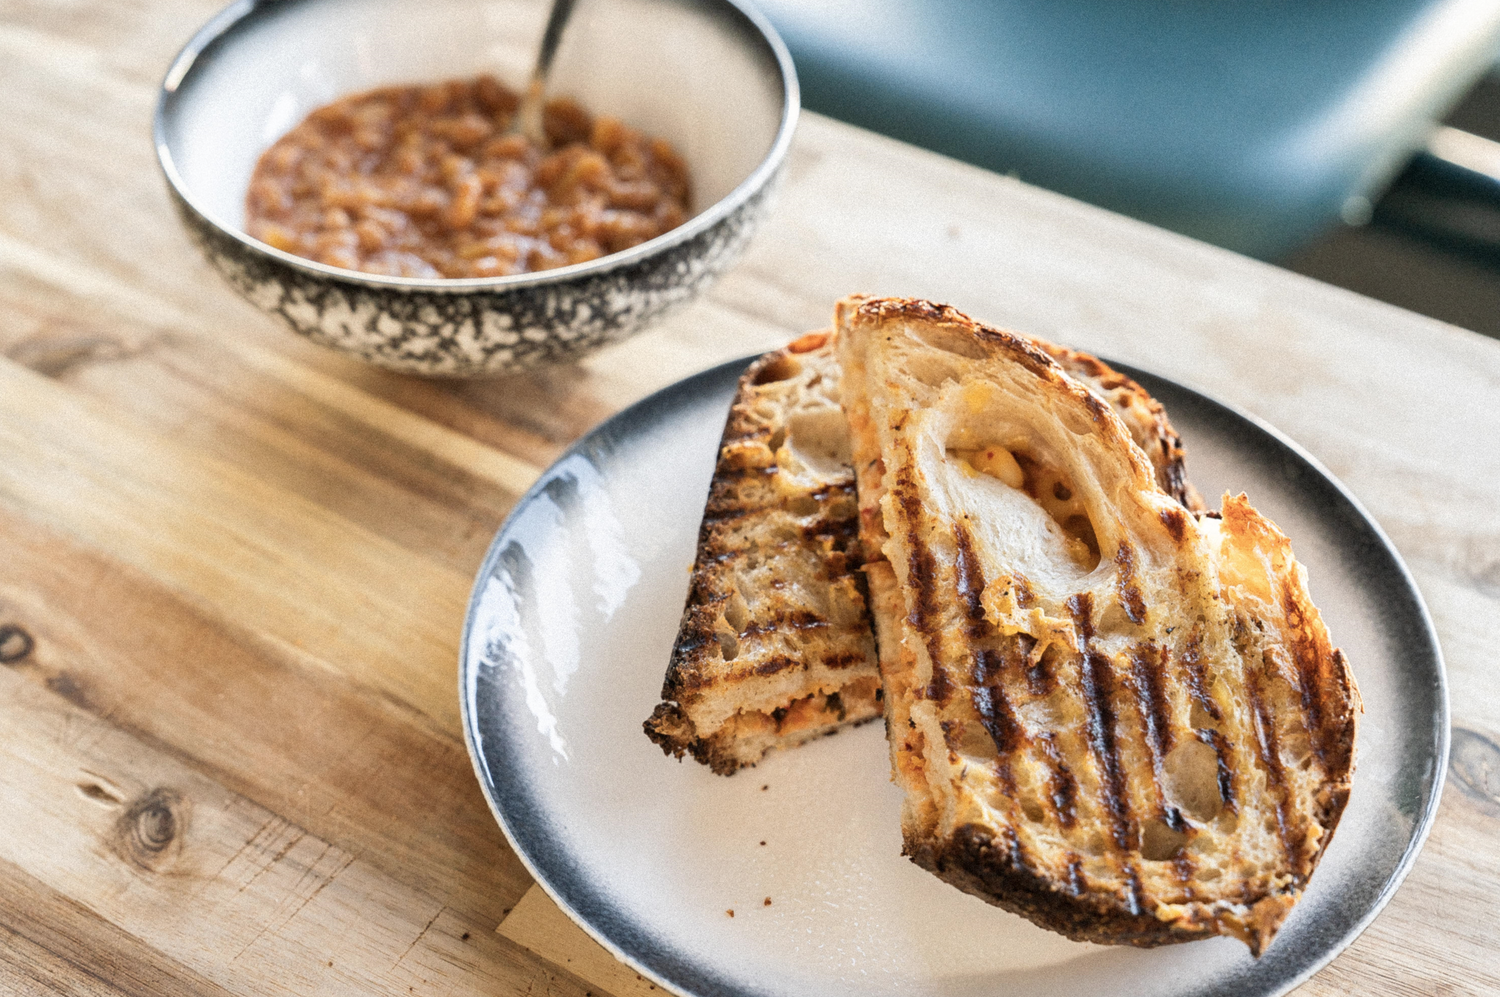 Image showcasing Motherlove kombucha's grilled kimcheese sandwich with Hawaiian-style baked beans as a side from their vegan menu